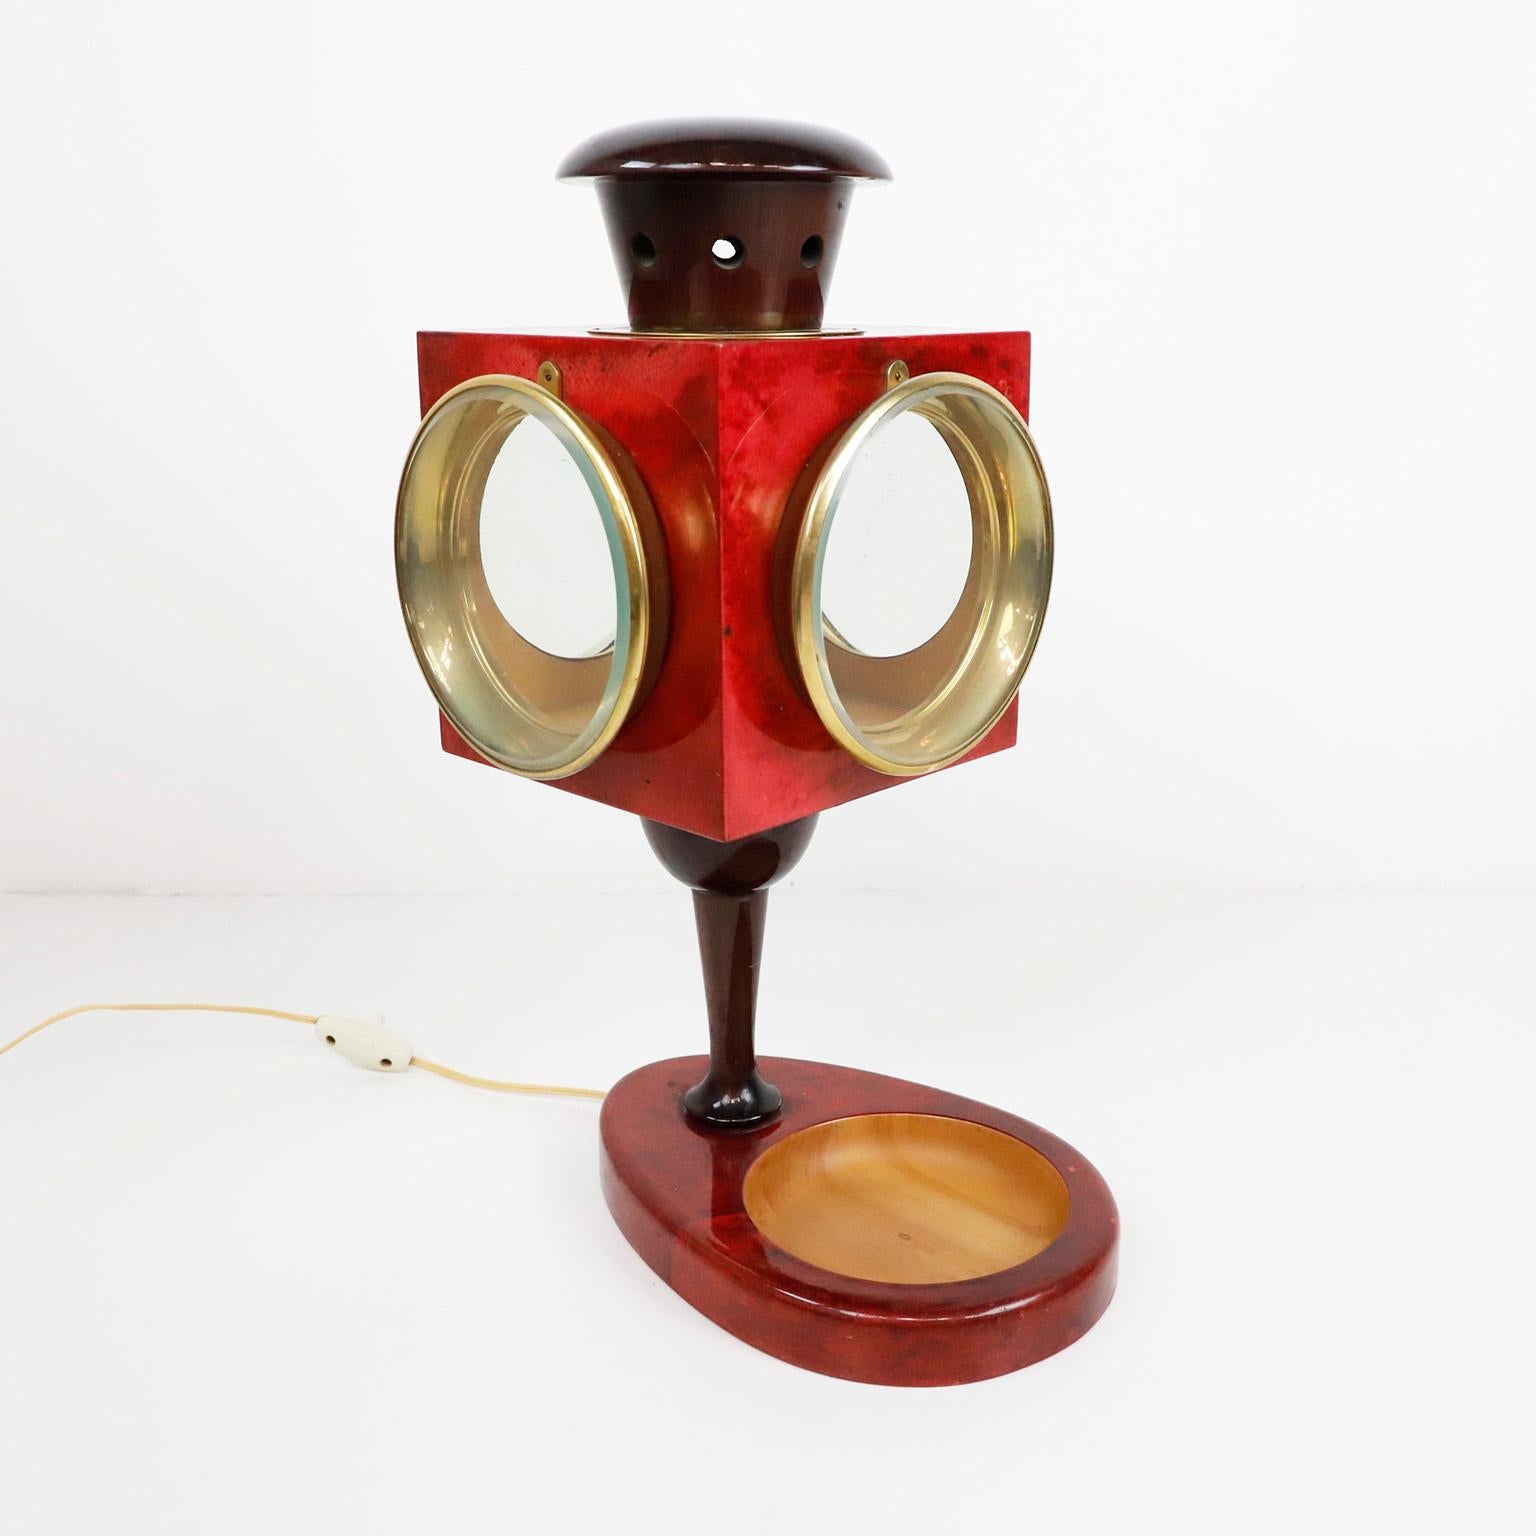 Big size lantern table lamp made by Aldo Tura, Italy in the 1950s.

The lamp are made in lacquered red goatskin with brass rings working in very good condition.